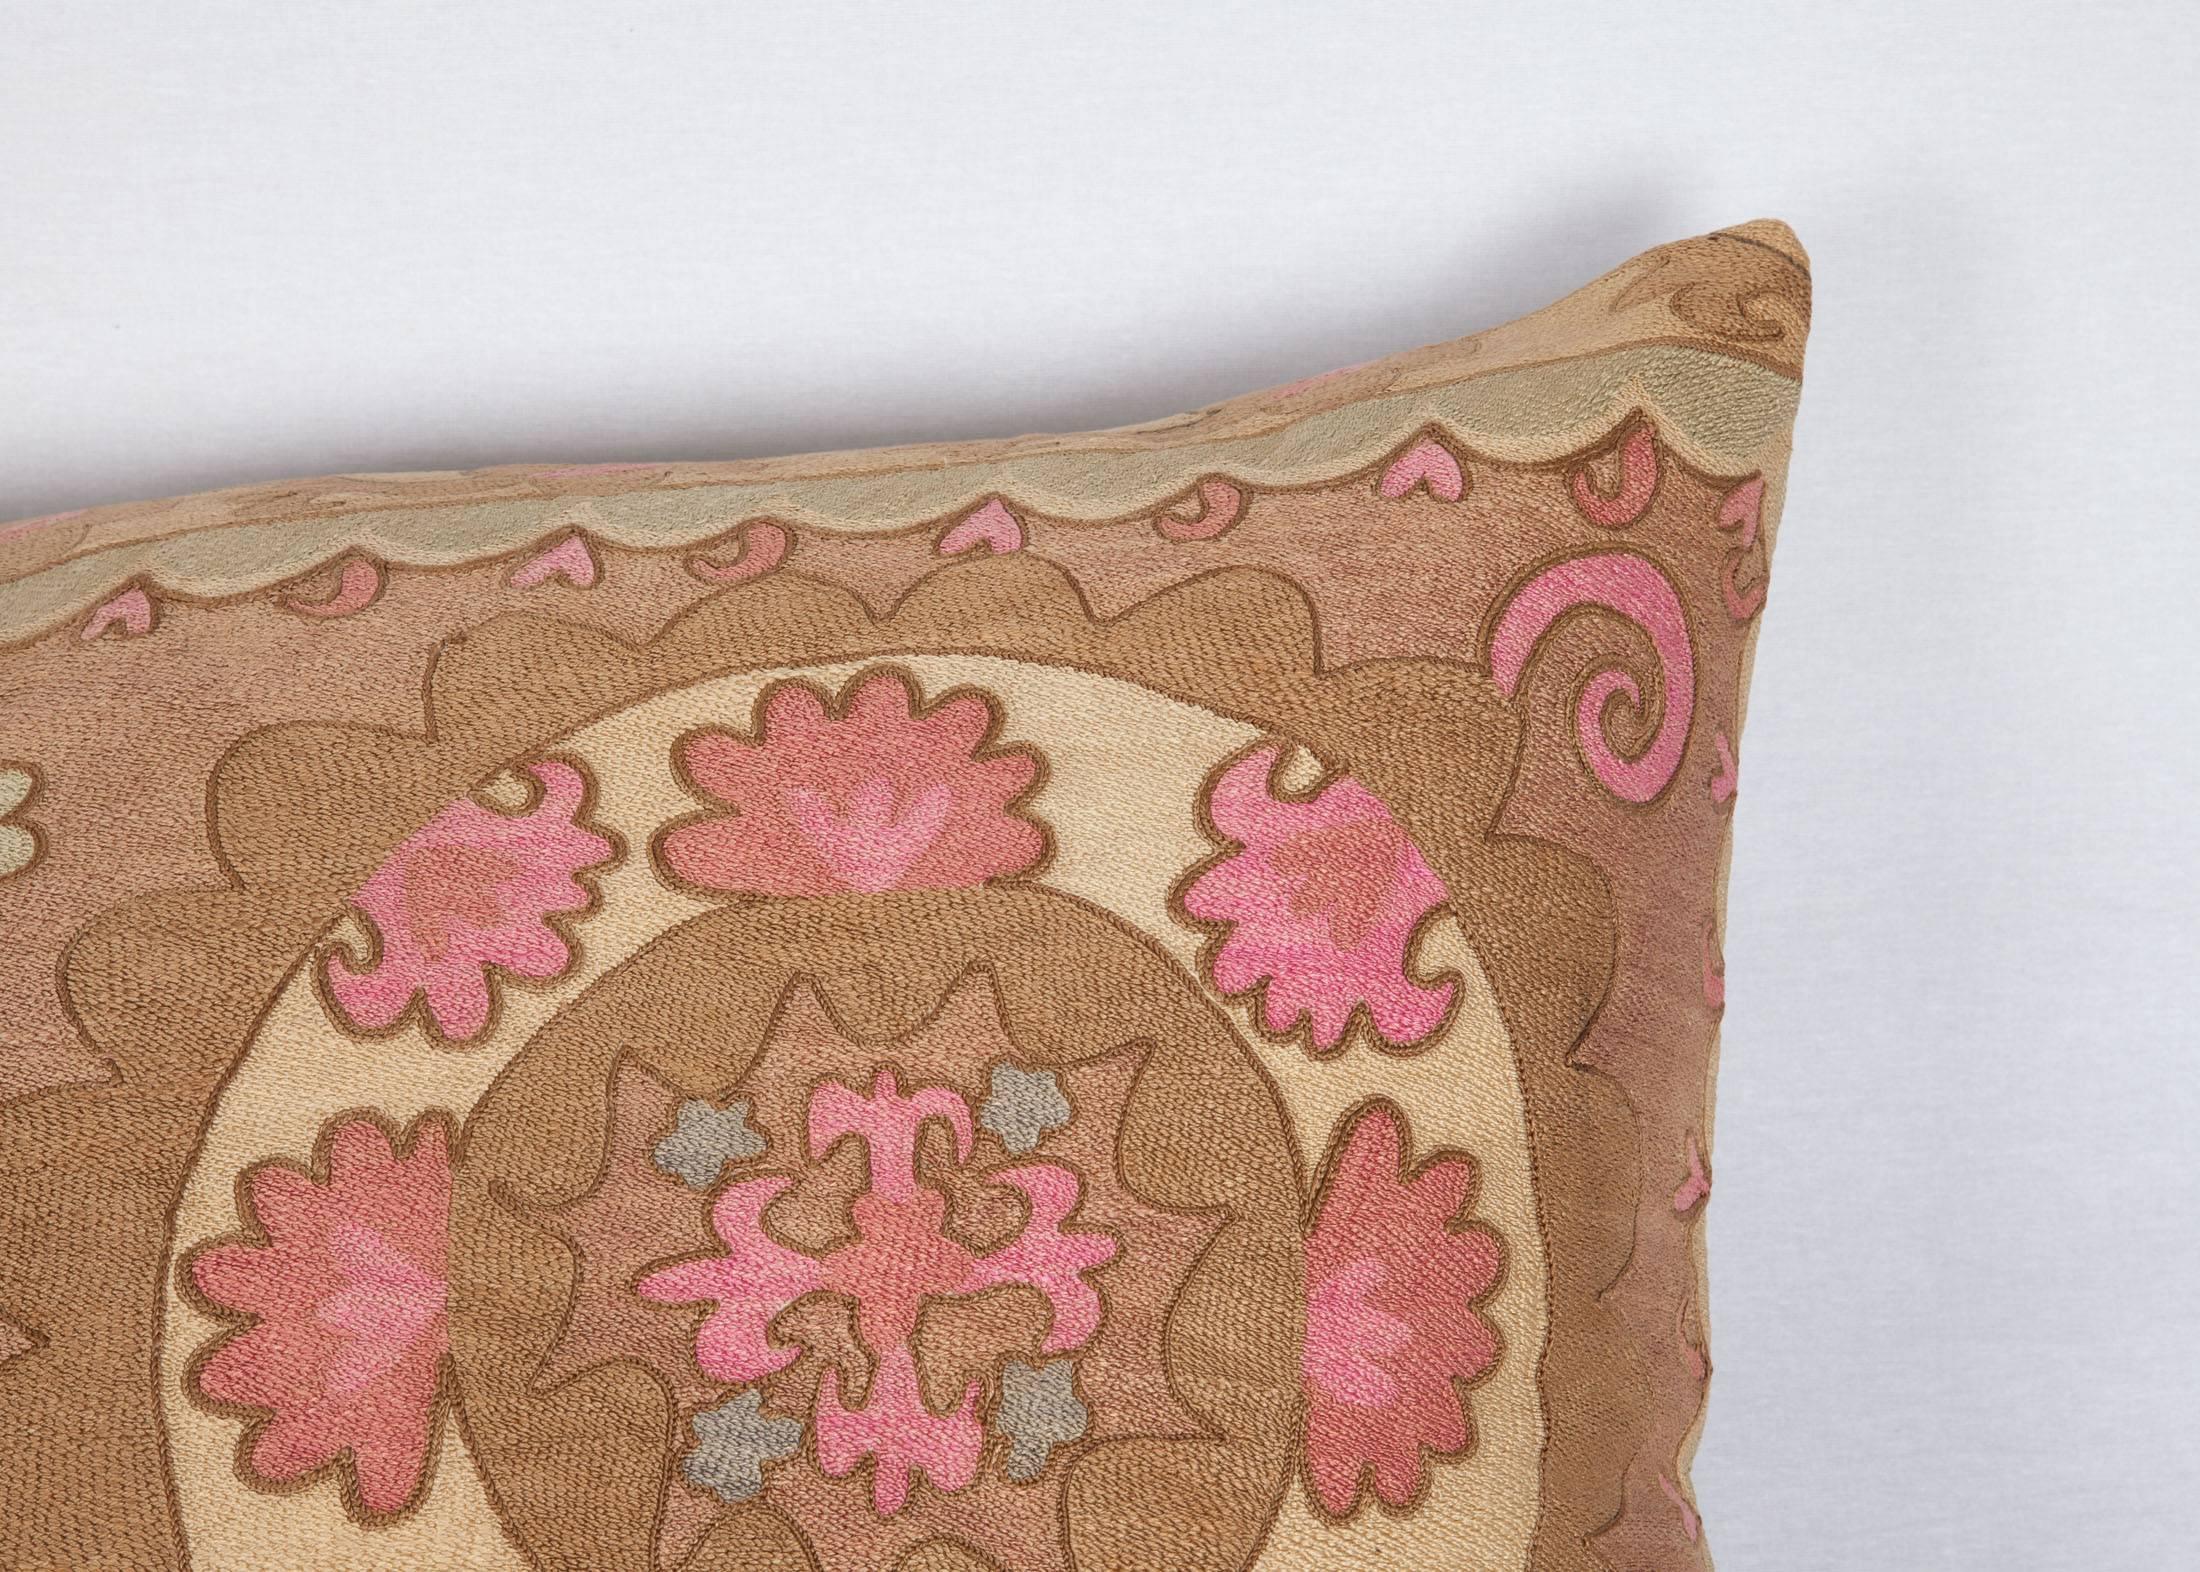 The pillow is made out of a mid-20th century. Uzbek silk Suzani.
It does not come with an insert but it comes with a bag made to the size and out of cotton to accommodate the filling.
The backing is made of linen.

Please note filling is not